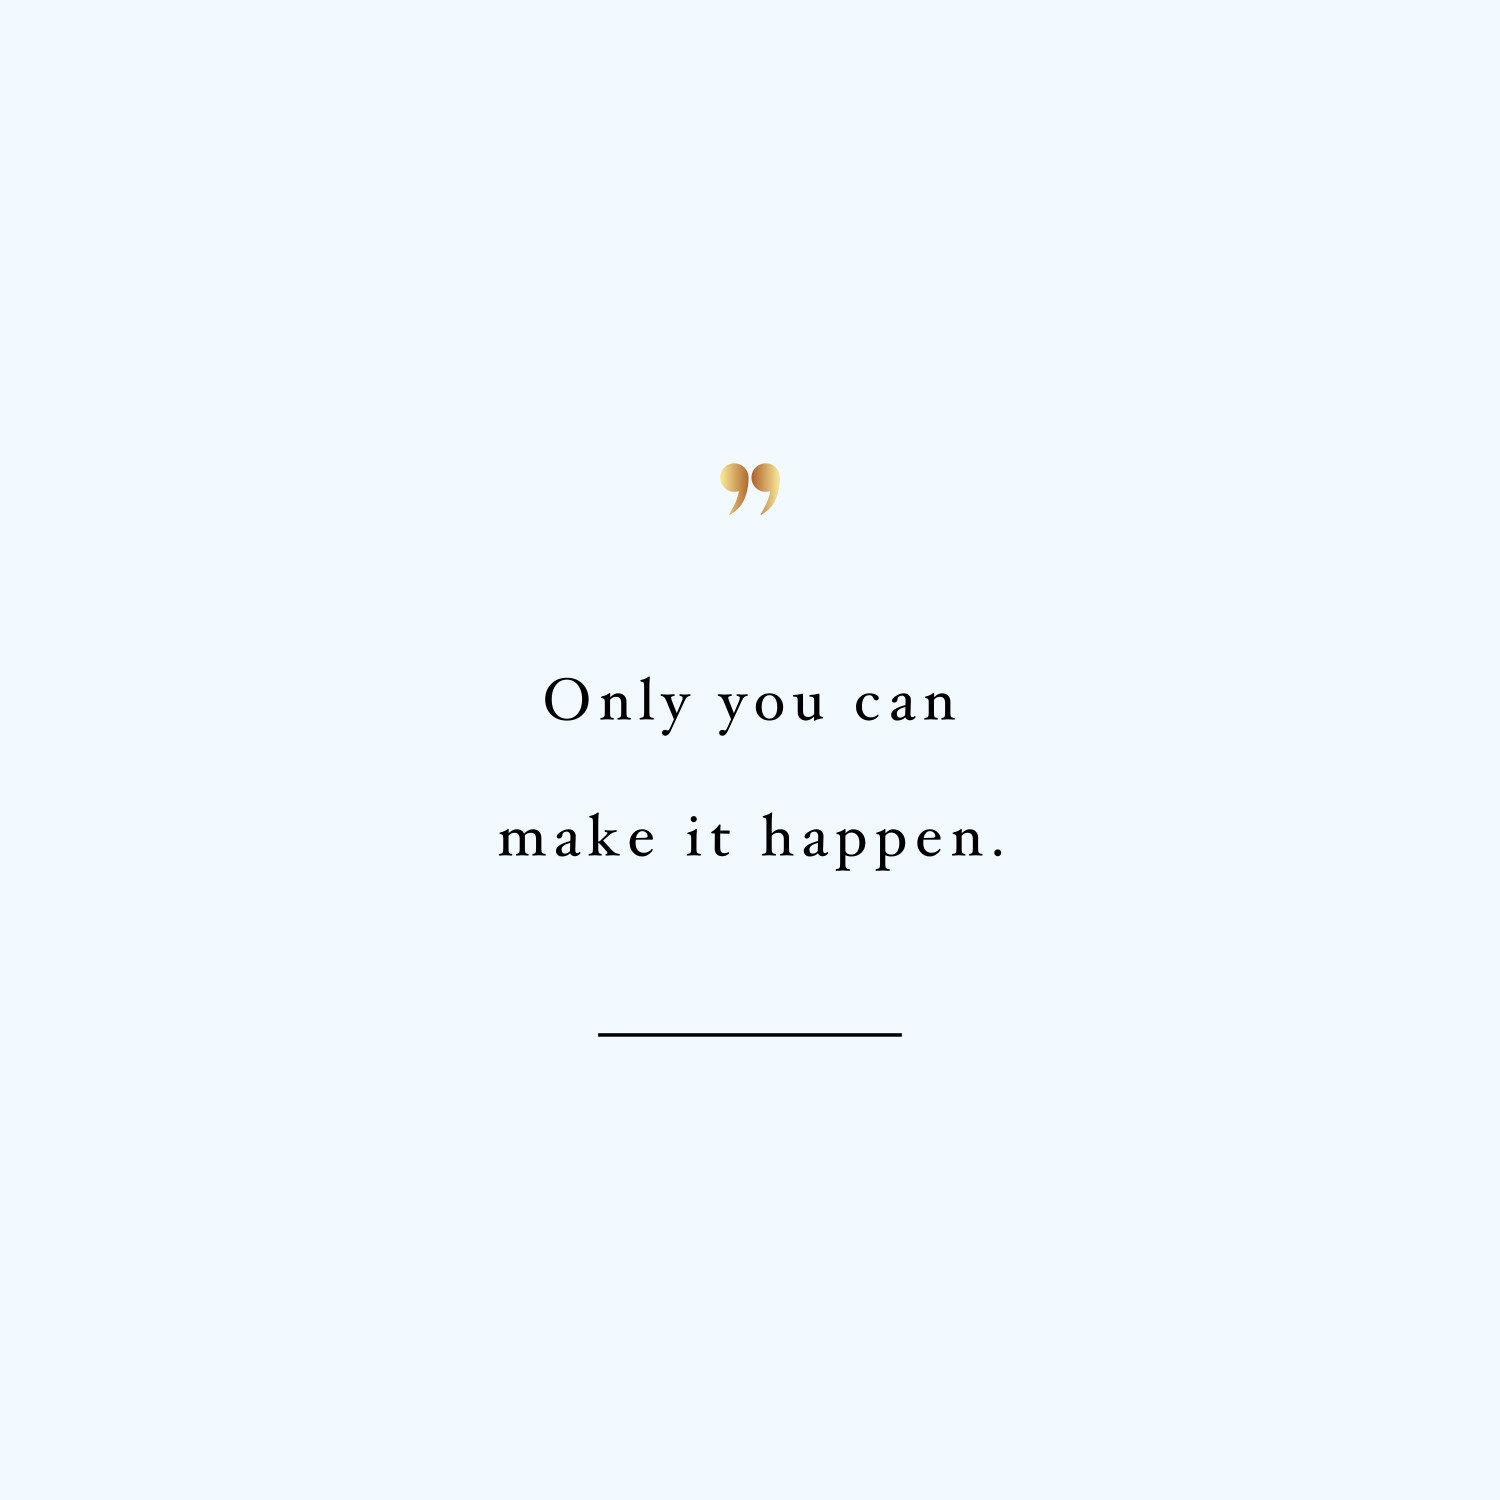 Only you! Browse our collection of motivational health and fitness quotes and get instant exercise and training inspiration. Transform positive thoughts into positive actions and get fit, healthy and happy! https://www.spotebi.com/workout-motivation/only-you-exercise-and-training-inspiration/